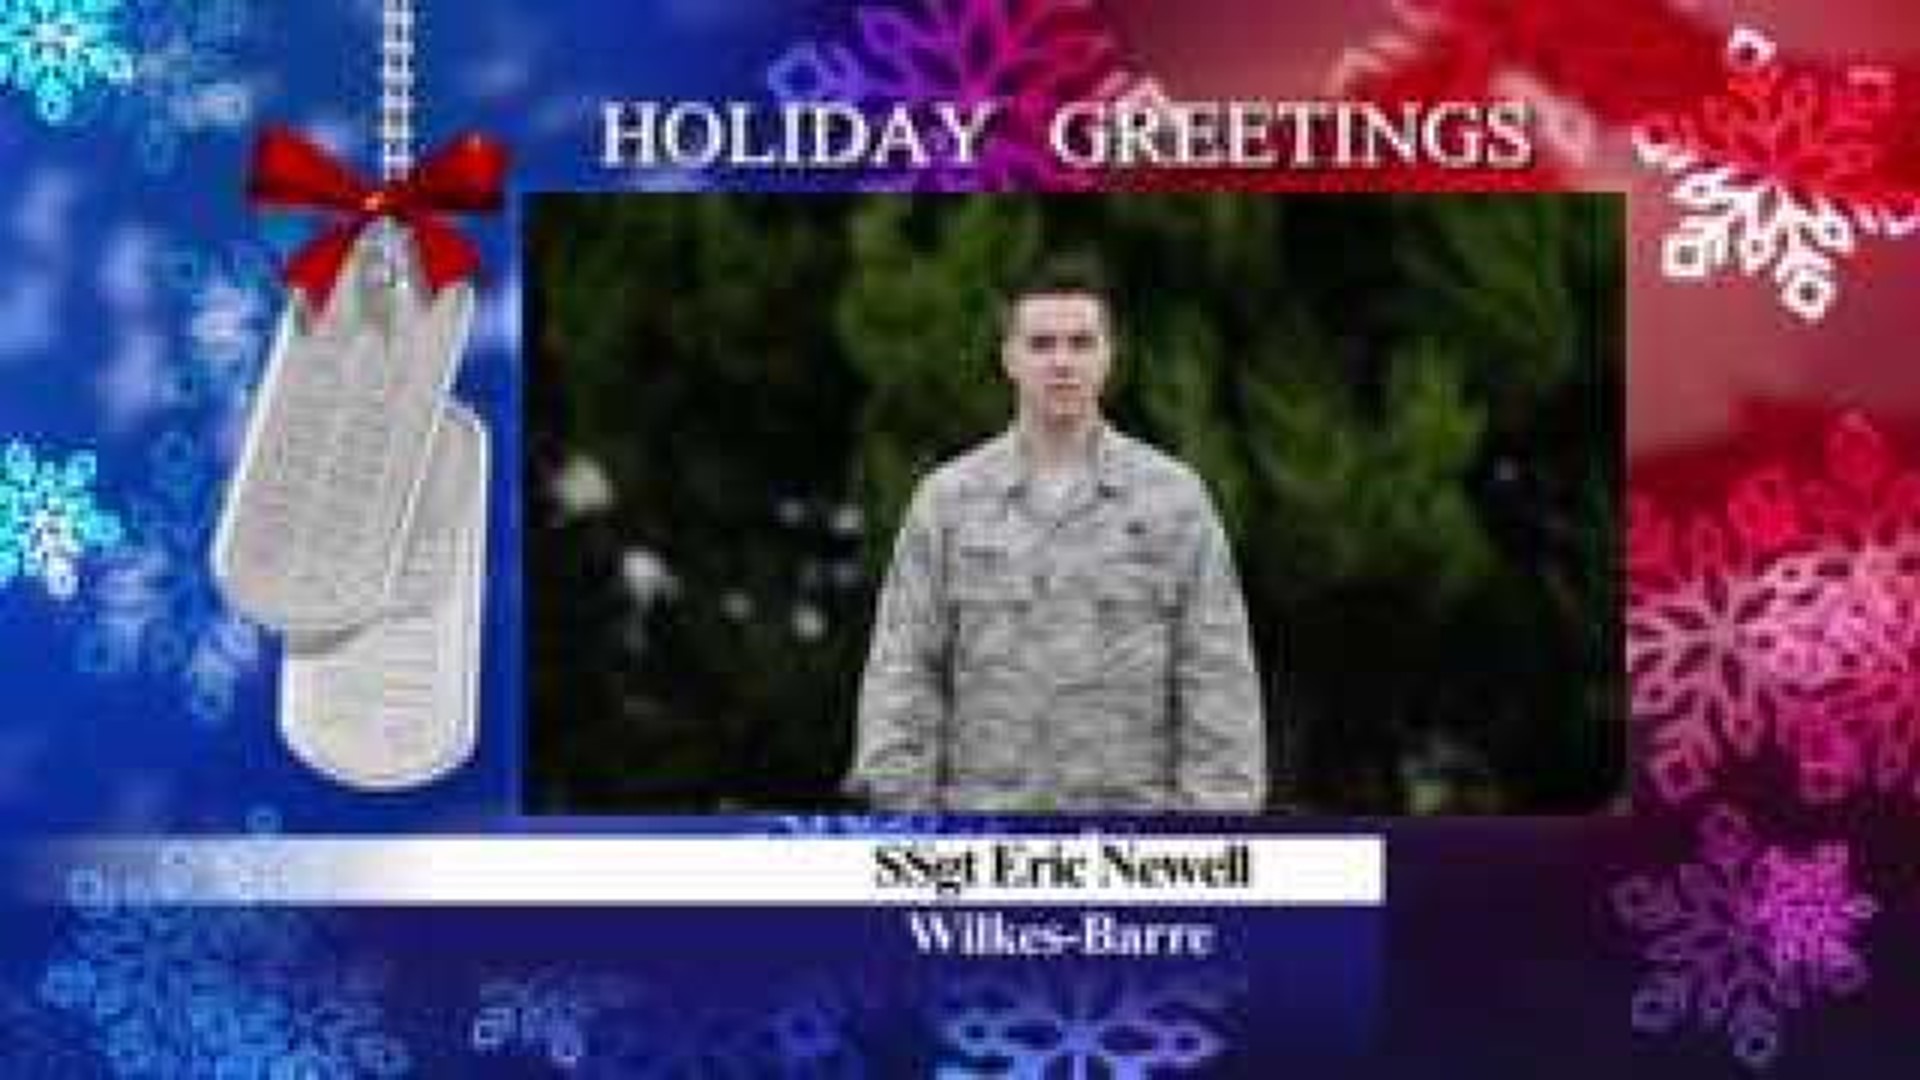 Military Greeting: Sgt. Eric Newell